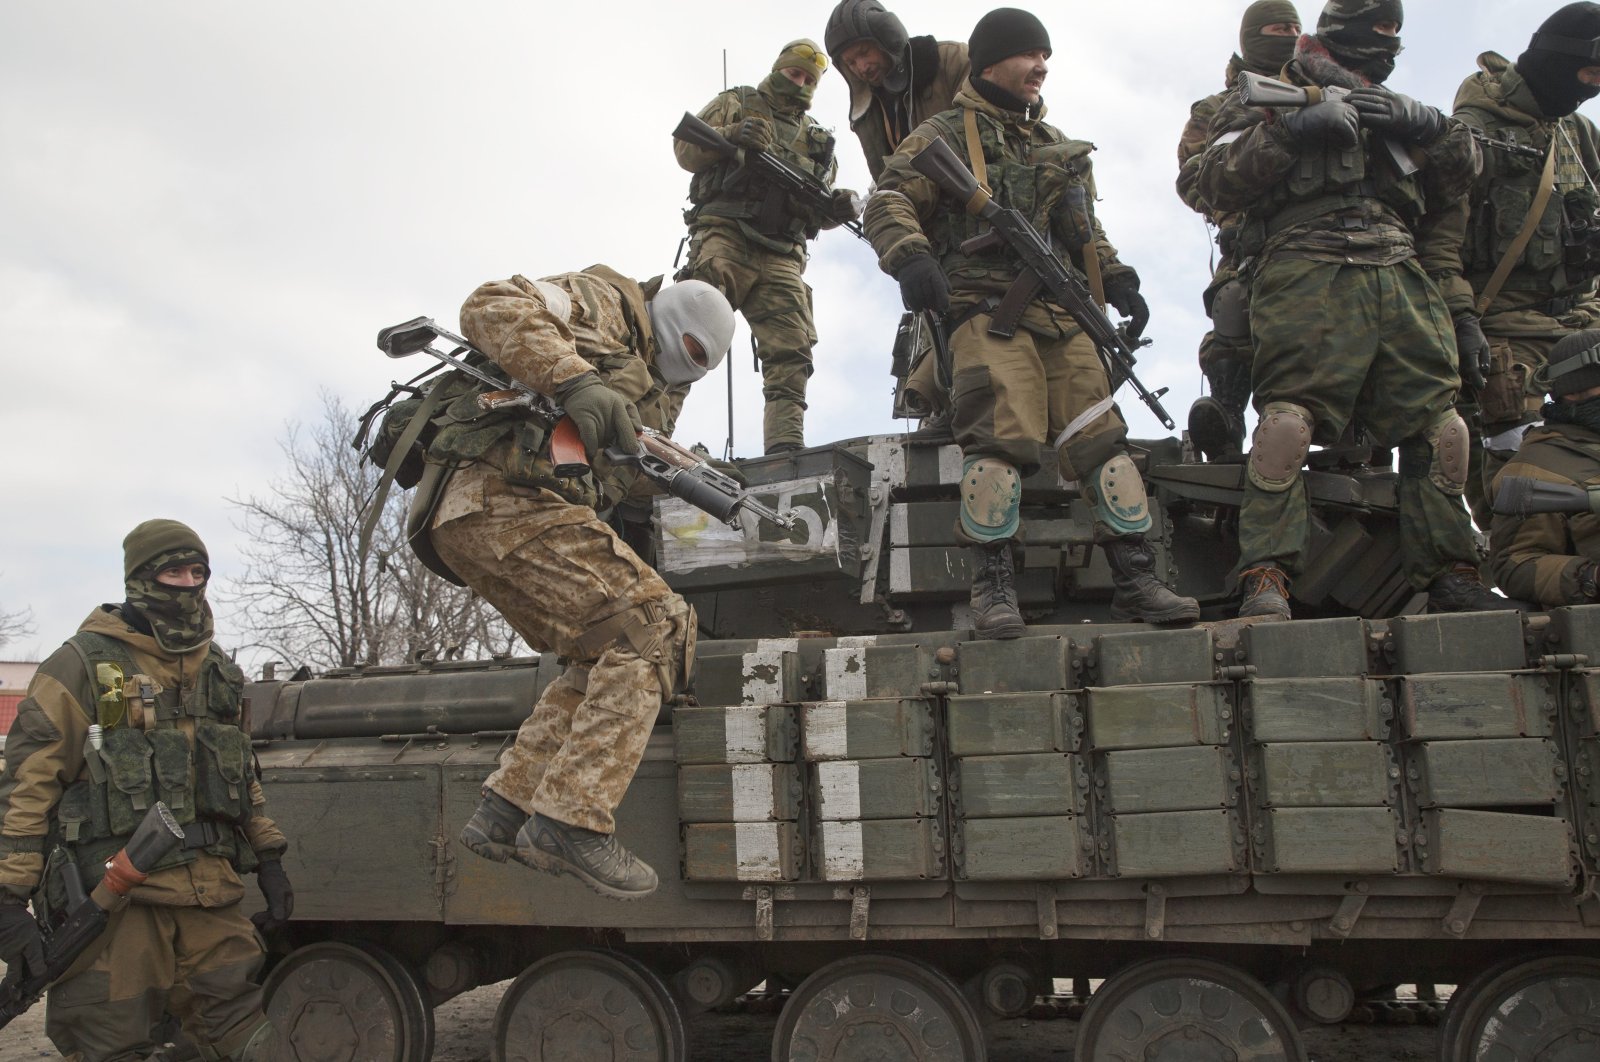 A Russia-backed rebel jumps off a tank in Donetsk, Ukraine, February 20, 2015. (AP Photo)